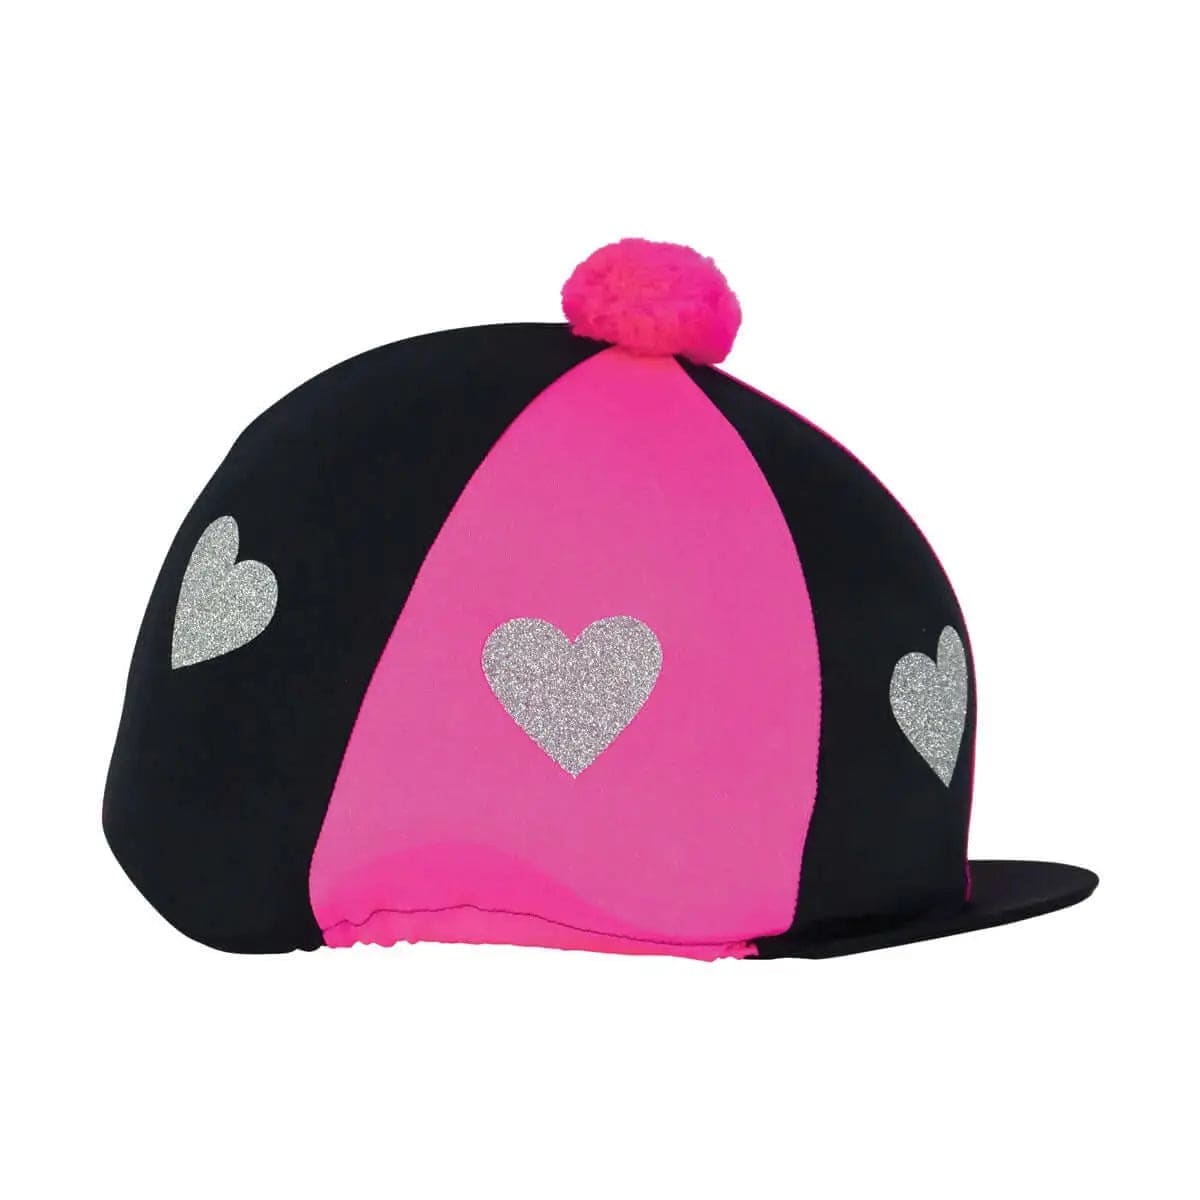 Love Heart Glitter Hat Cover by Little Rider Hot Pink/Black One Size HY Equestrian Hat Silks Barnstaple Equestrian Supplies